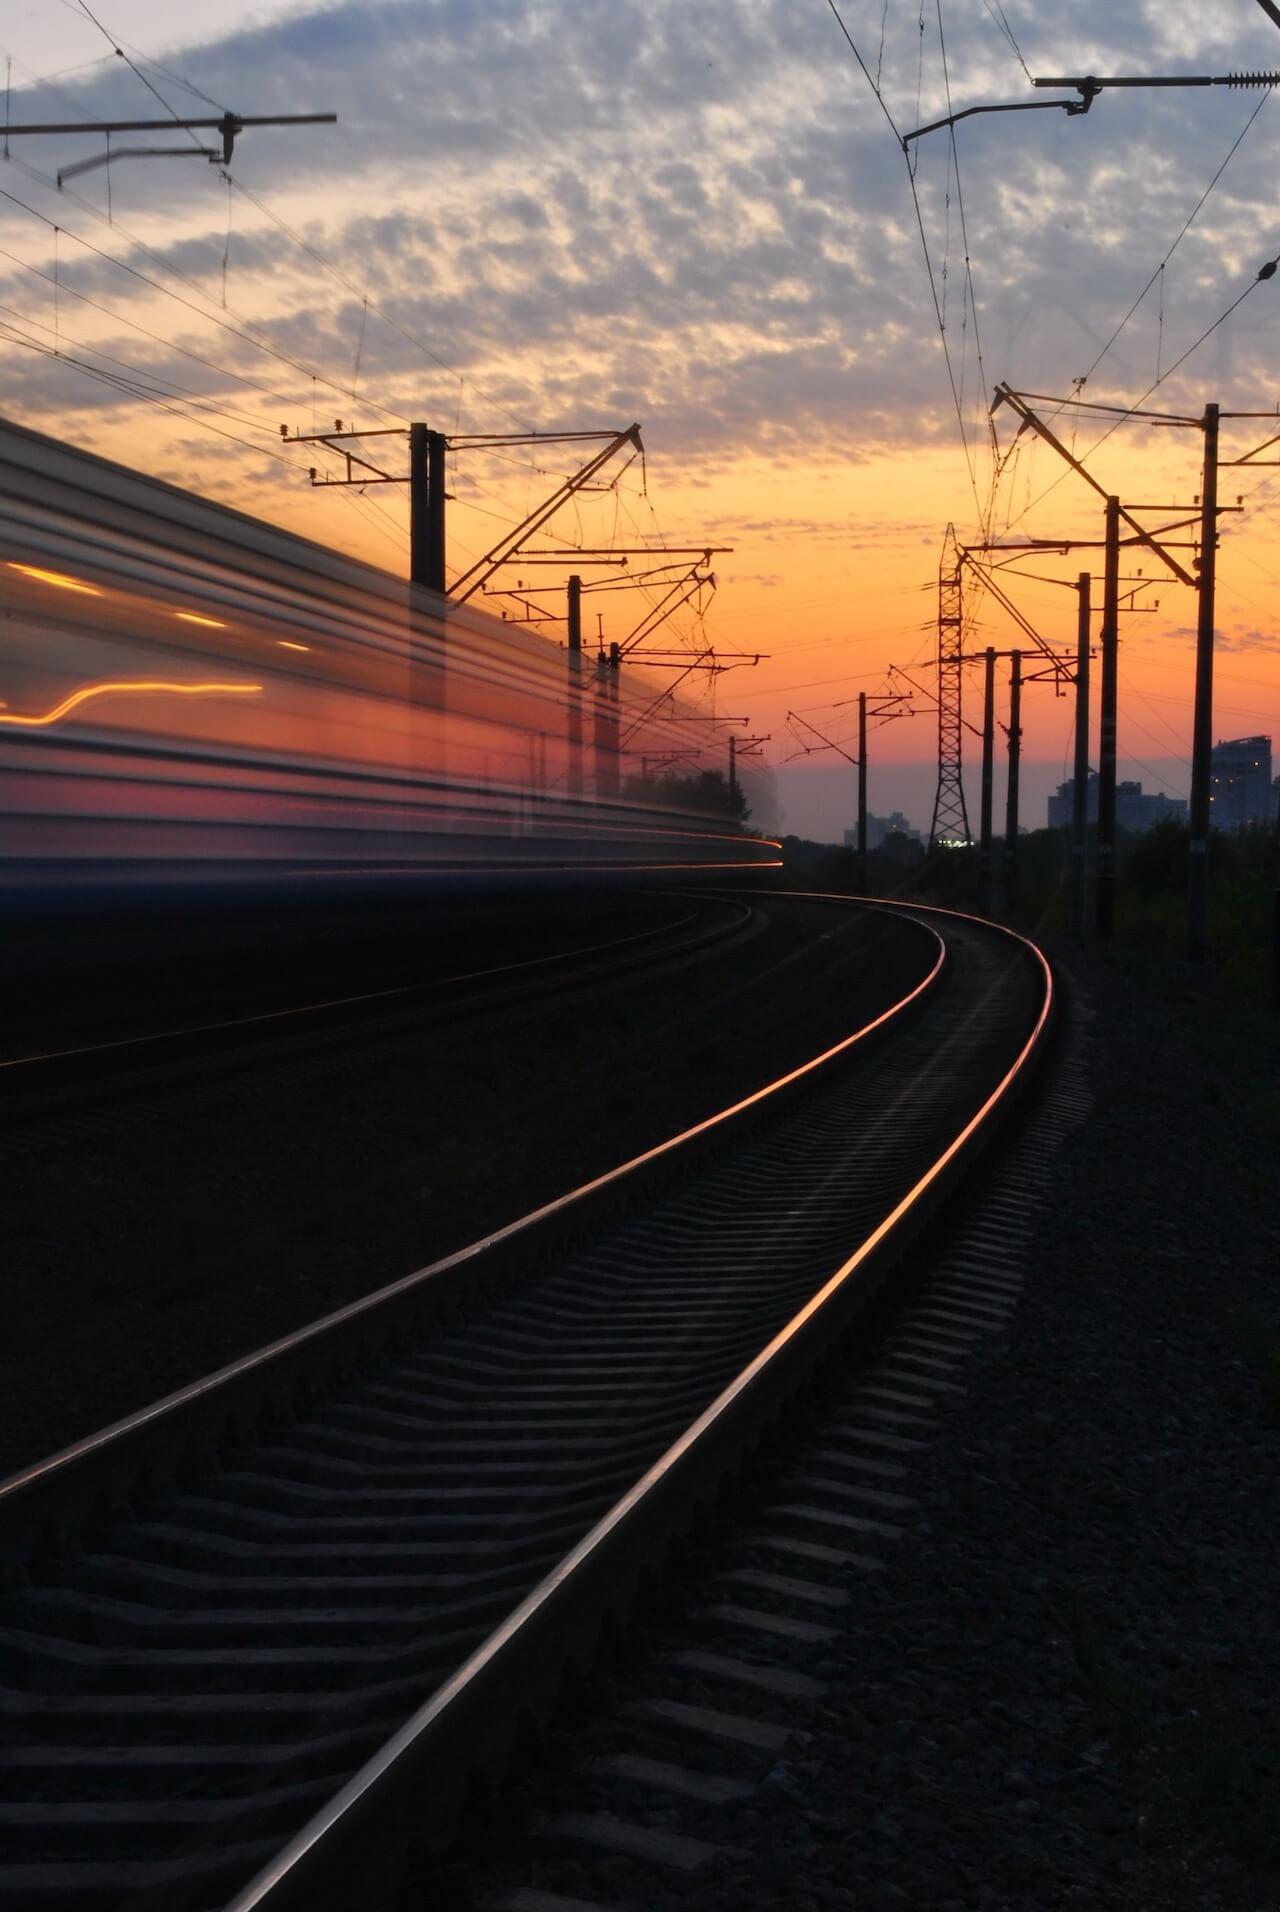 Rapidly moving Train with Sunset in the background